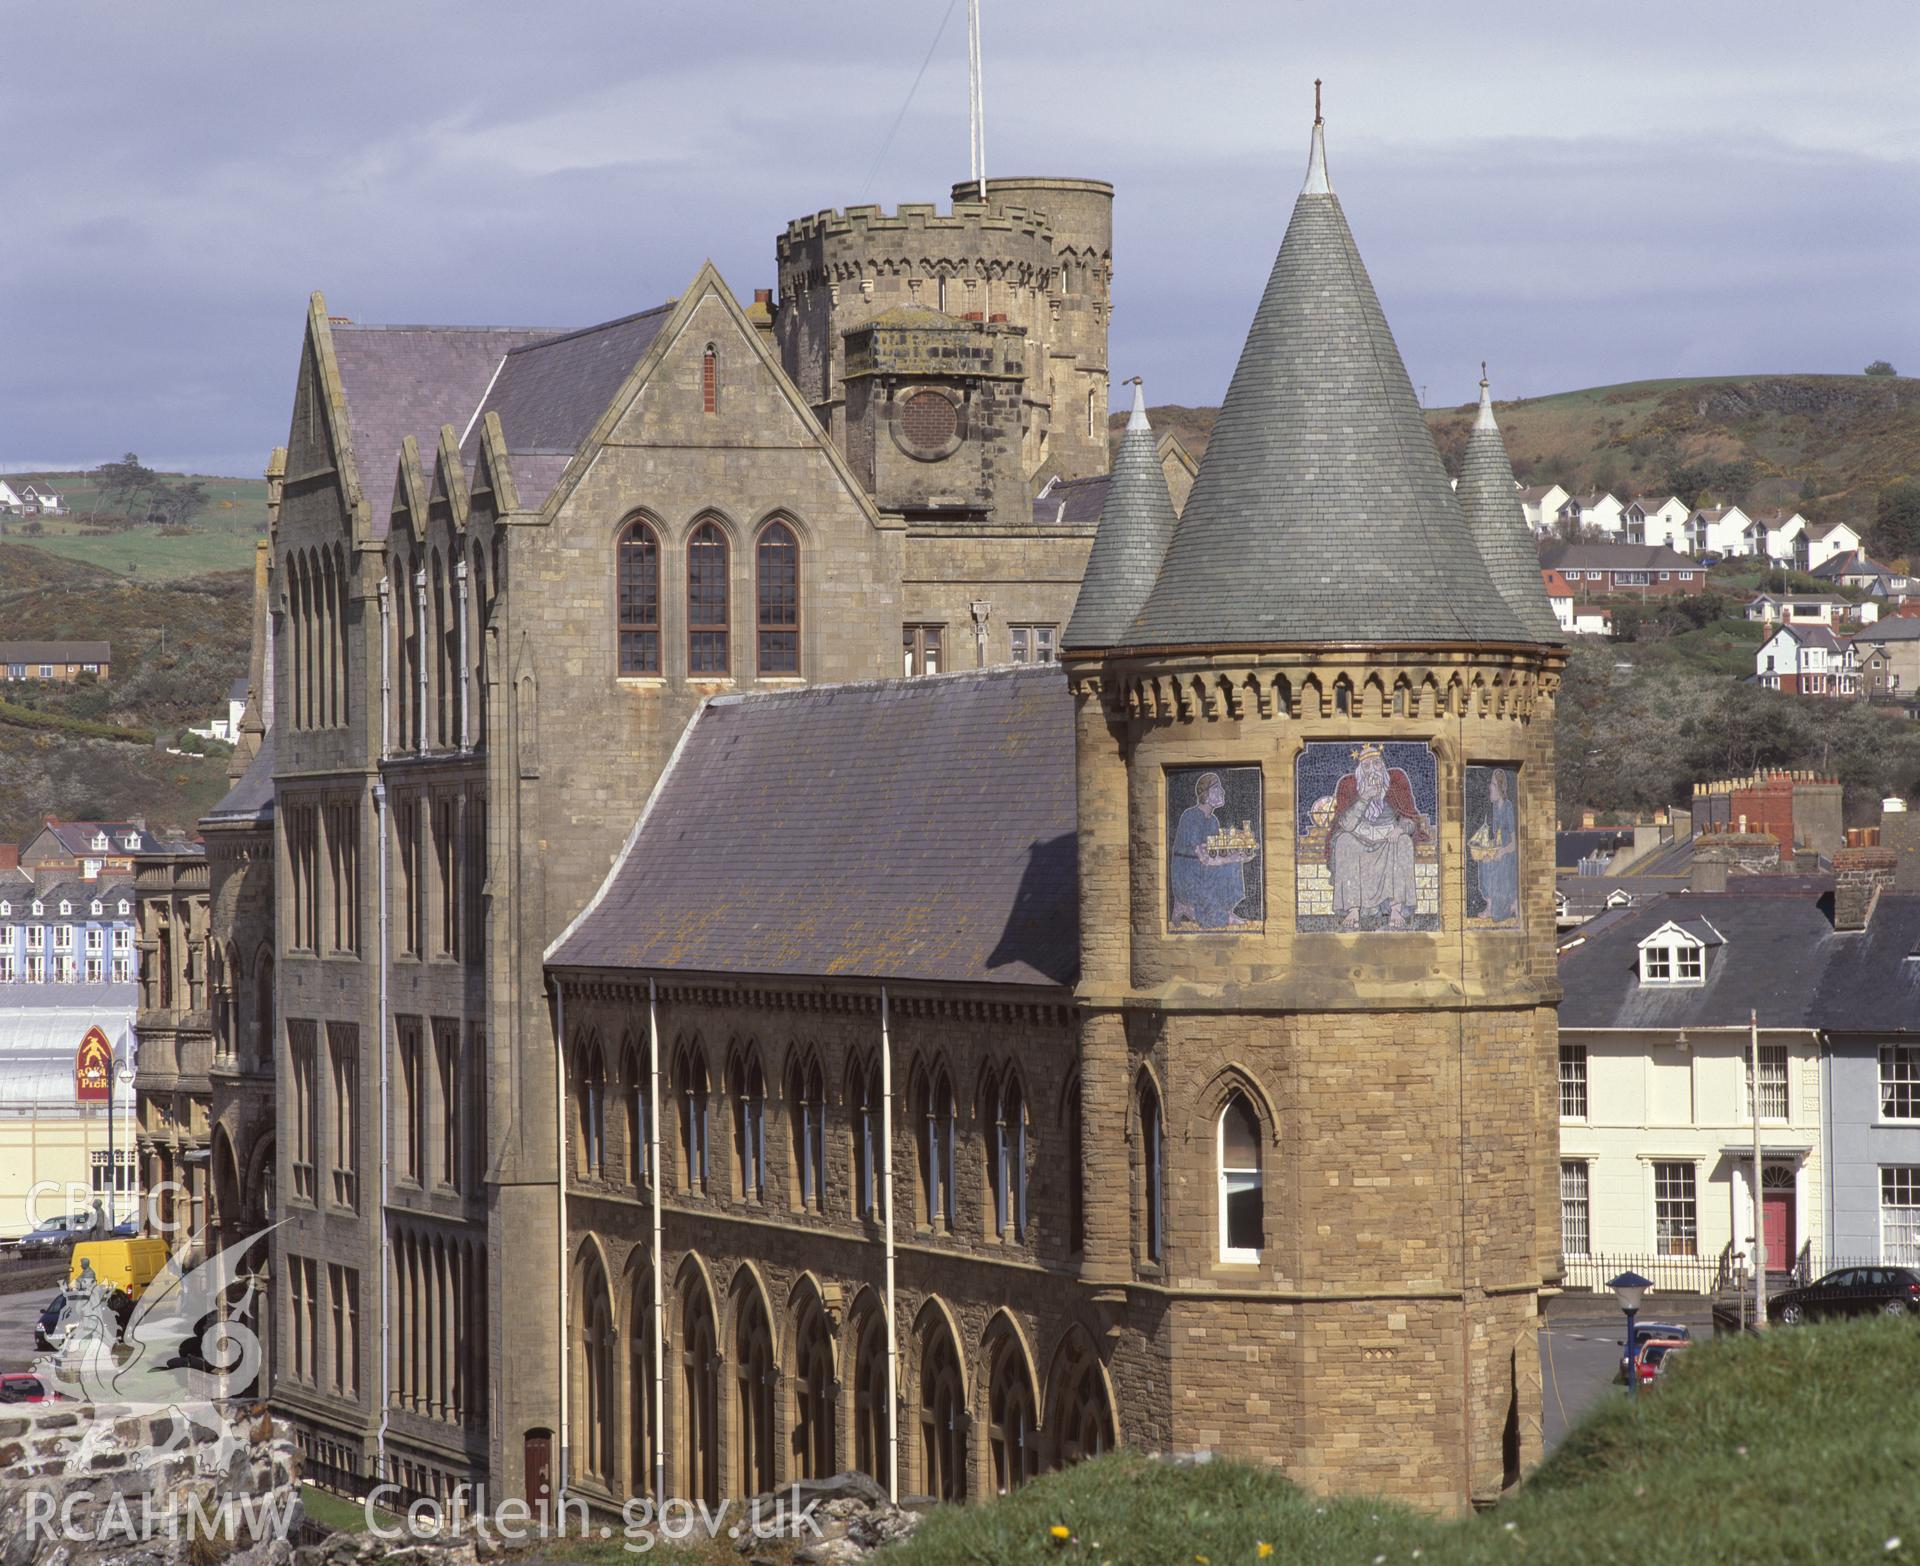 RCAHMW colour transparency showing view of Old College, Aberystwyth from the west.